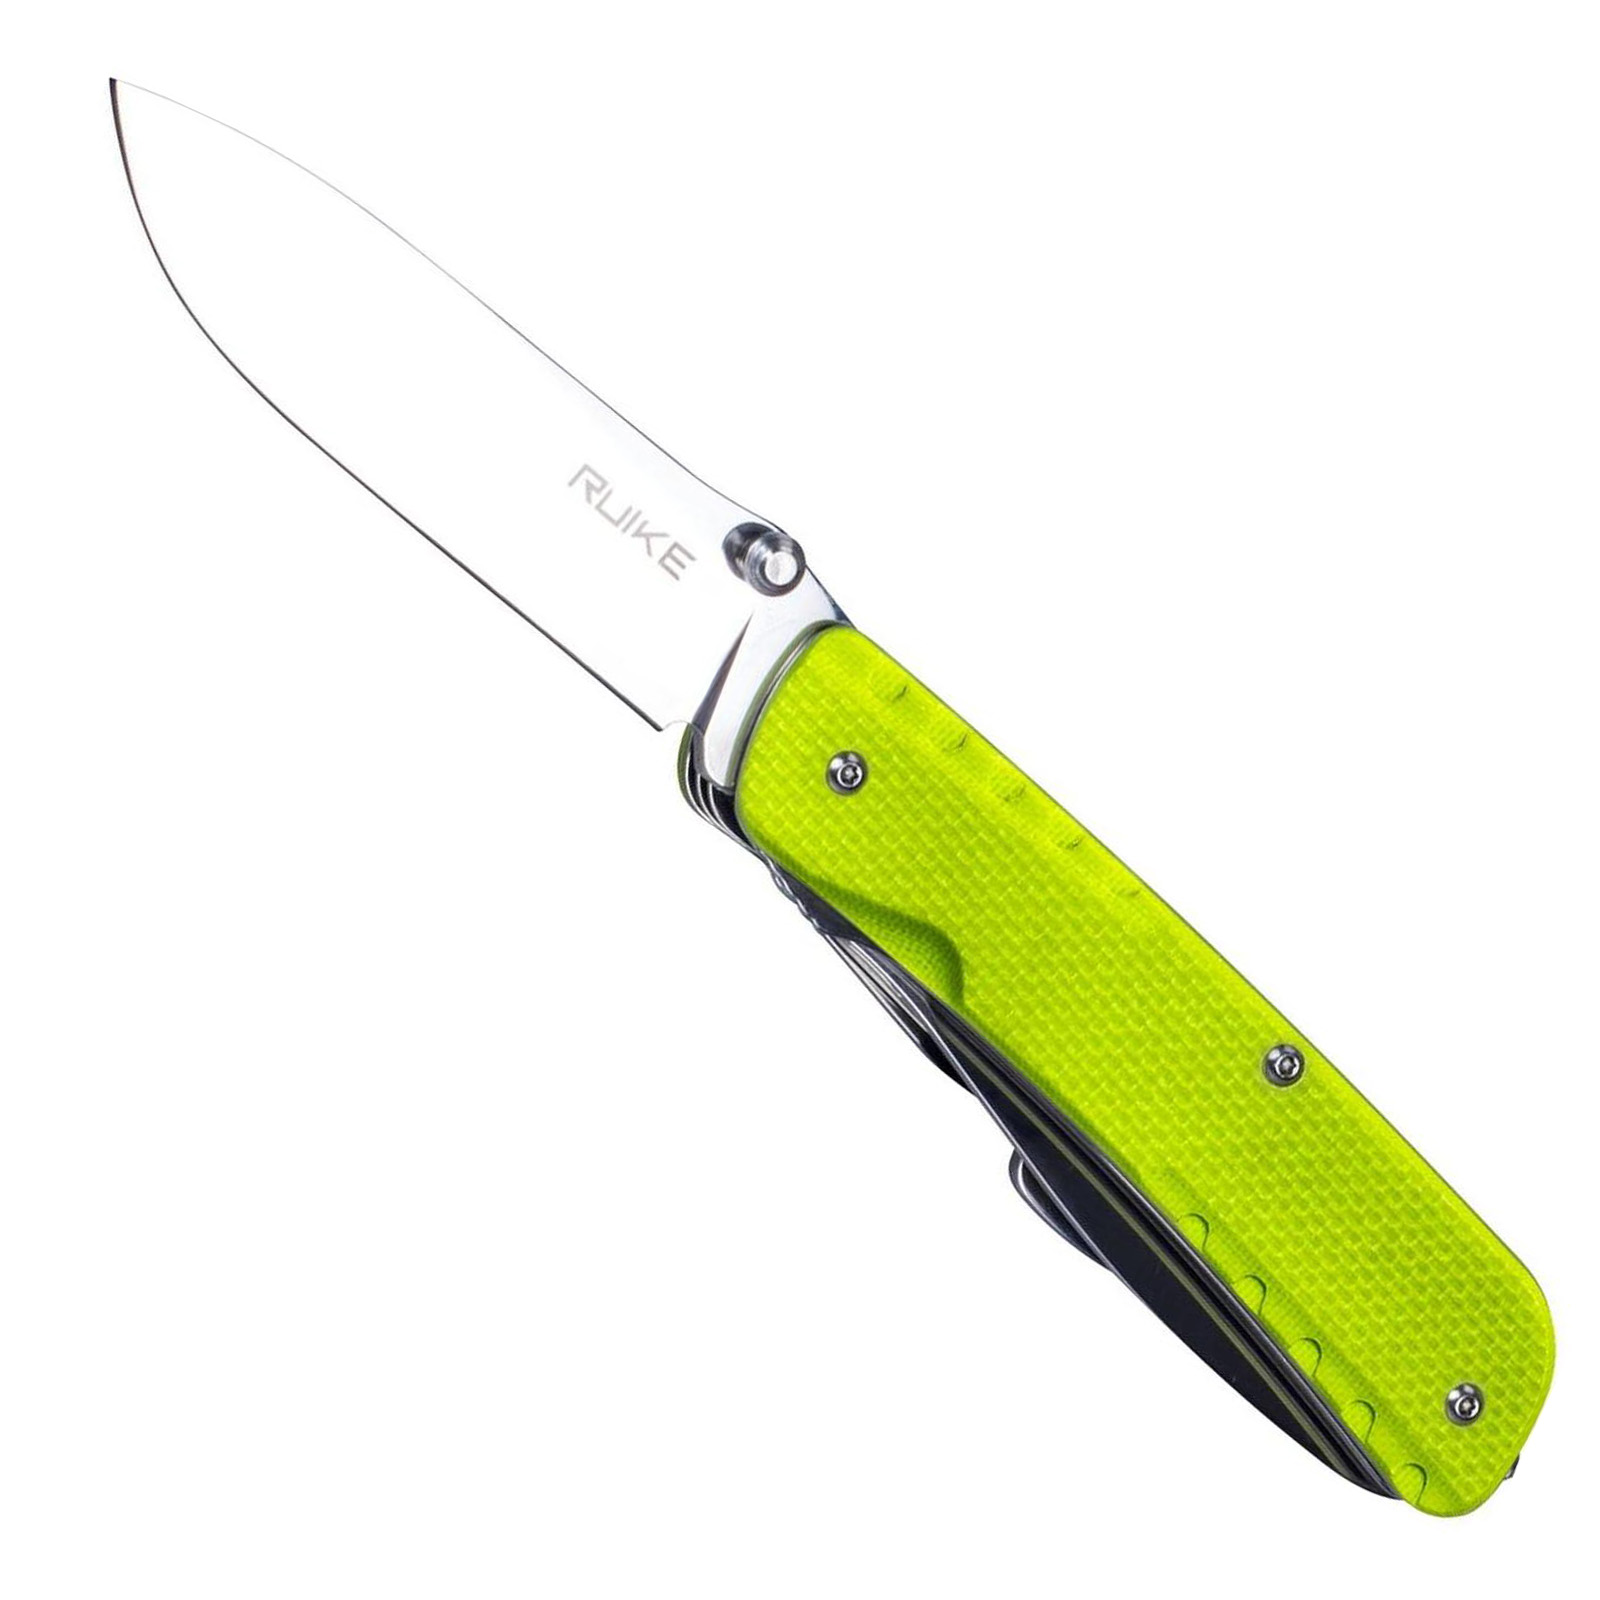  Knives LD43 Green G10 Handle 12C27 Steel Multitool Folding Rescue .